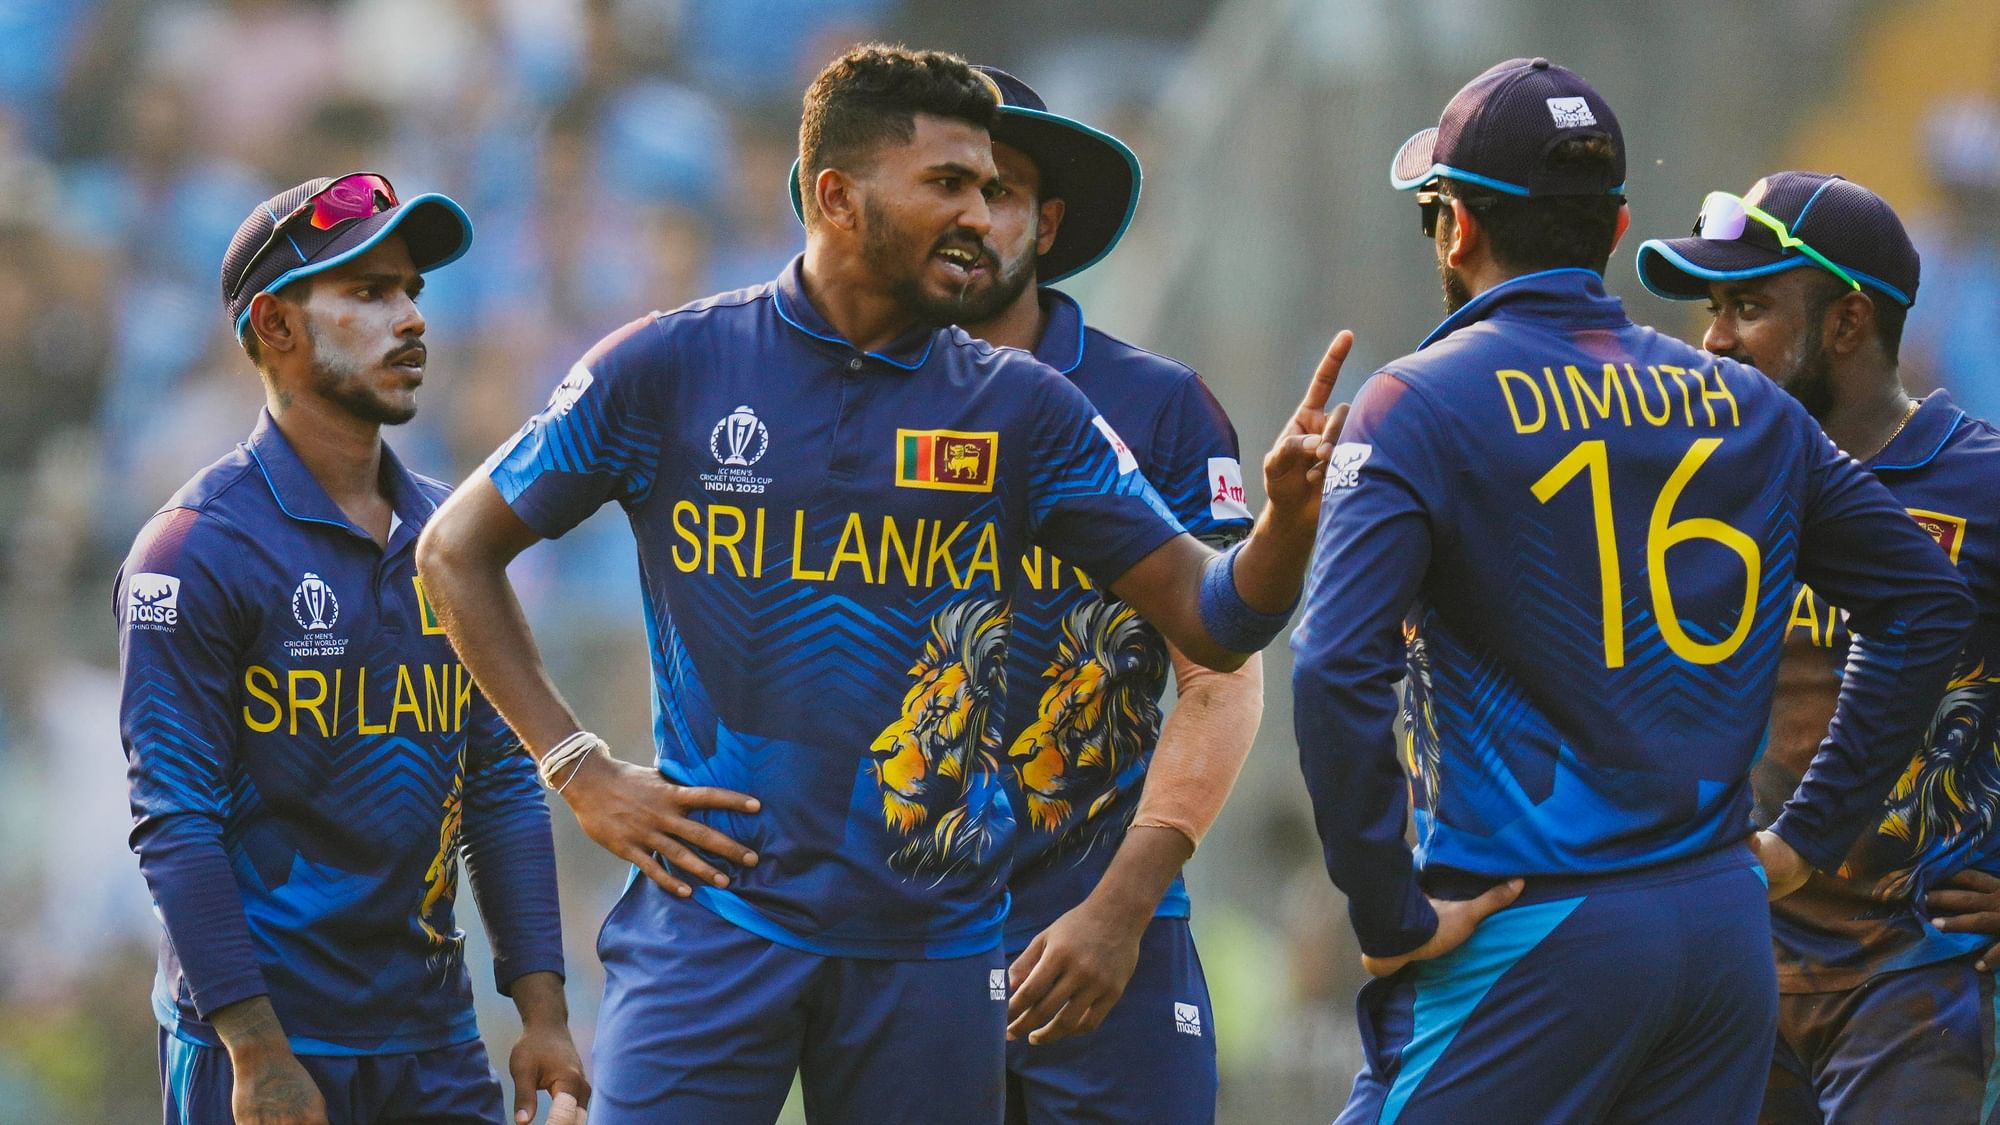 <div class="paragraphs"><p>The International Cricket Council (ICC) Board on Friday, 10 November, suspended Sri Lanka Cricket’s membership of the body over alleged government interference in the administration of cricket in the country.</p></div>